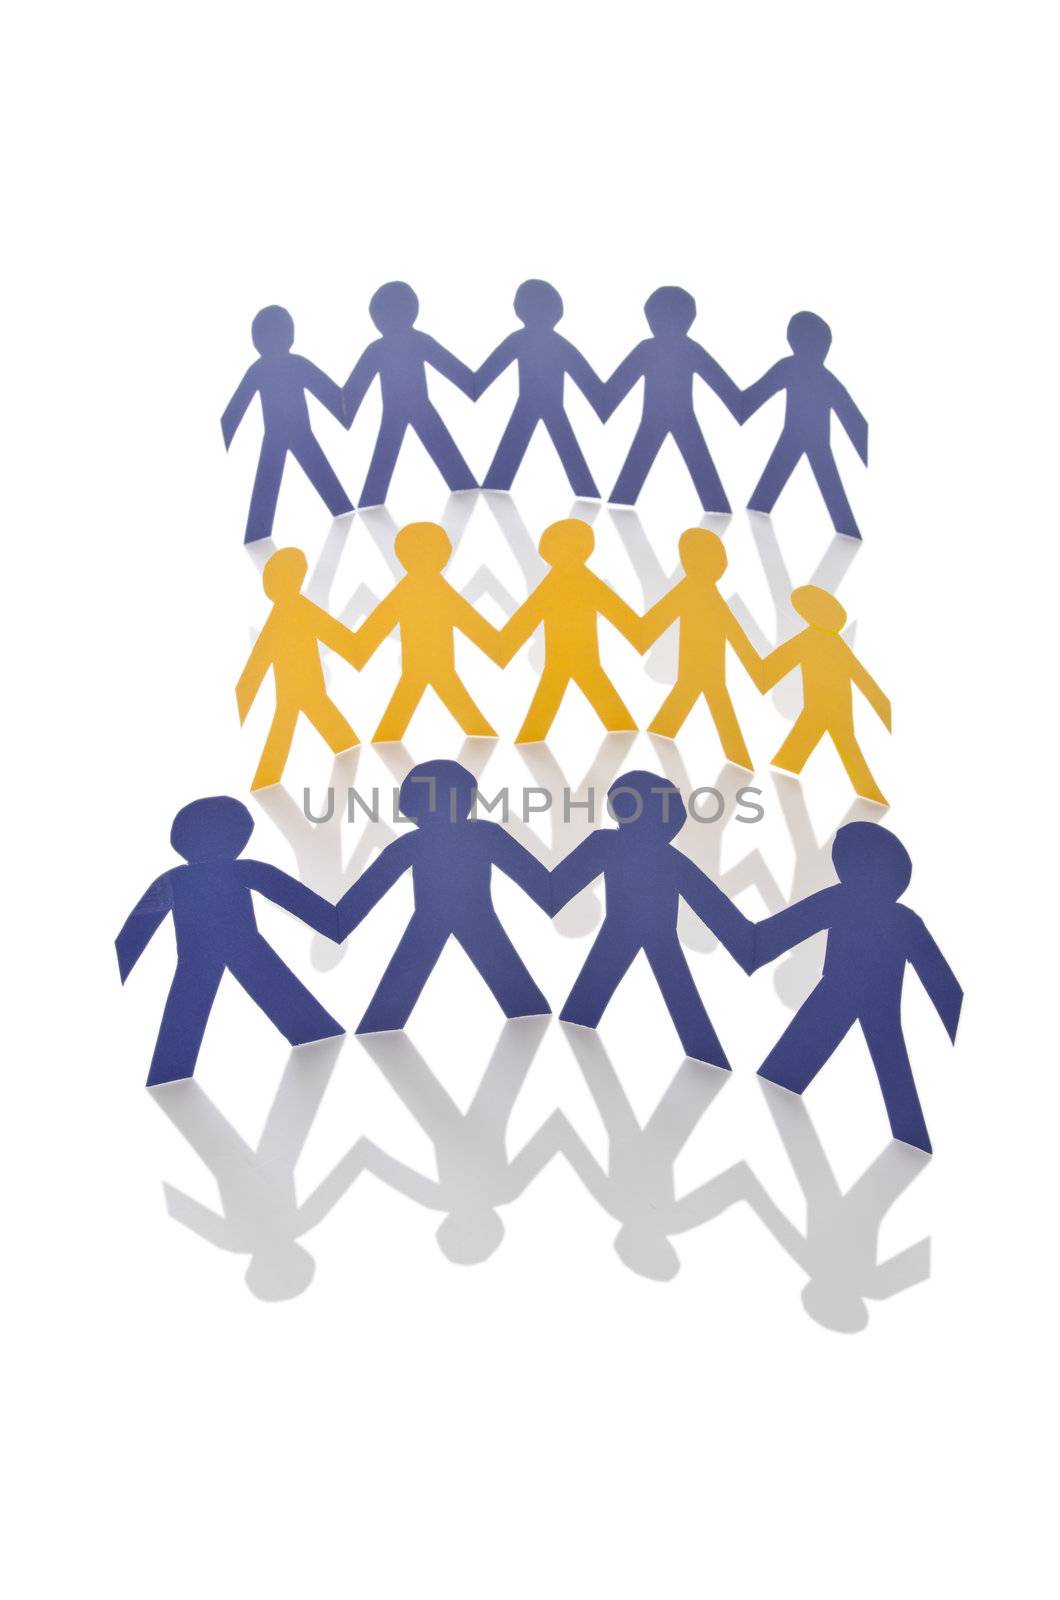 Teamwork concept with paper cut people by Elnur